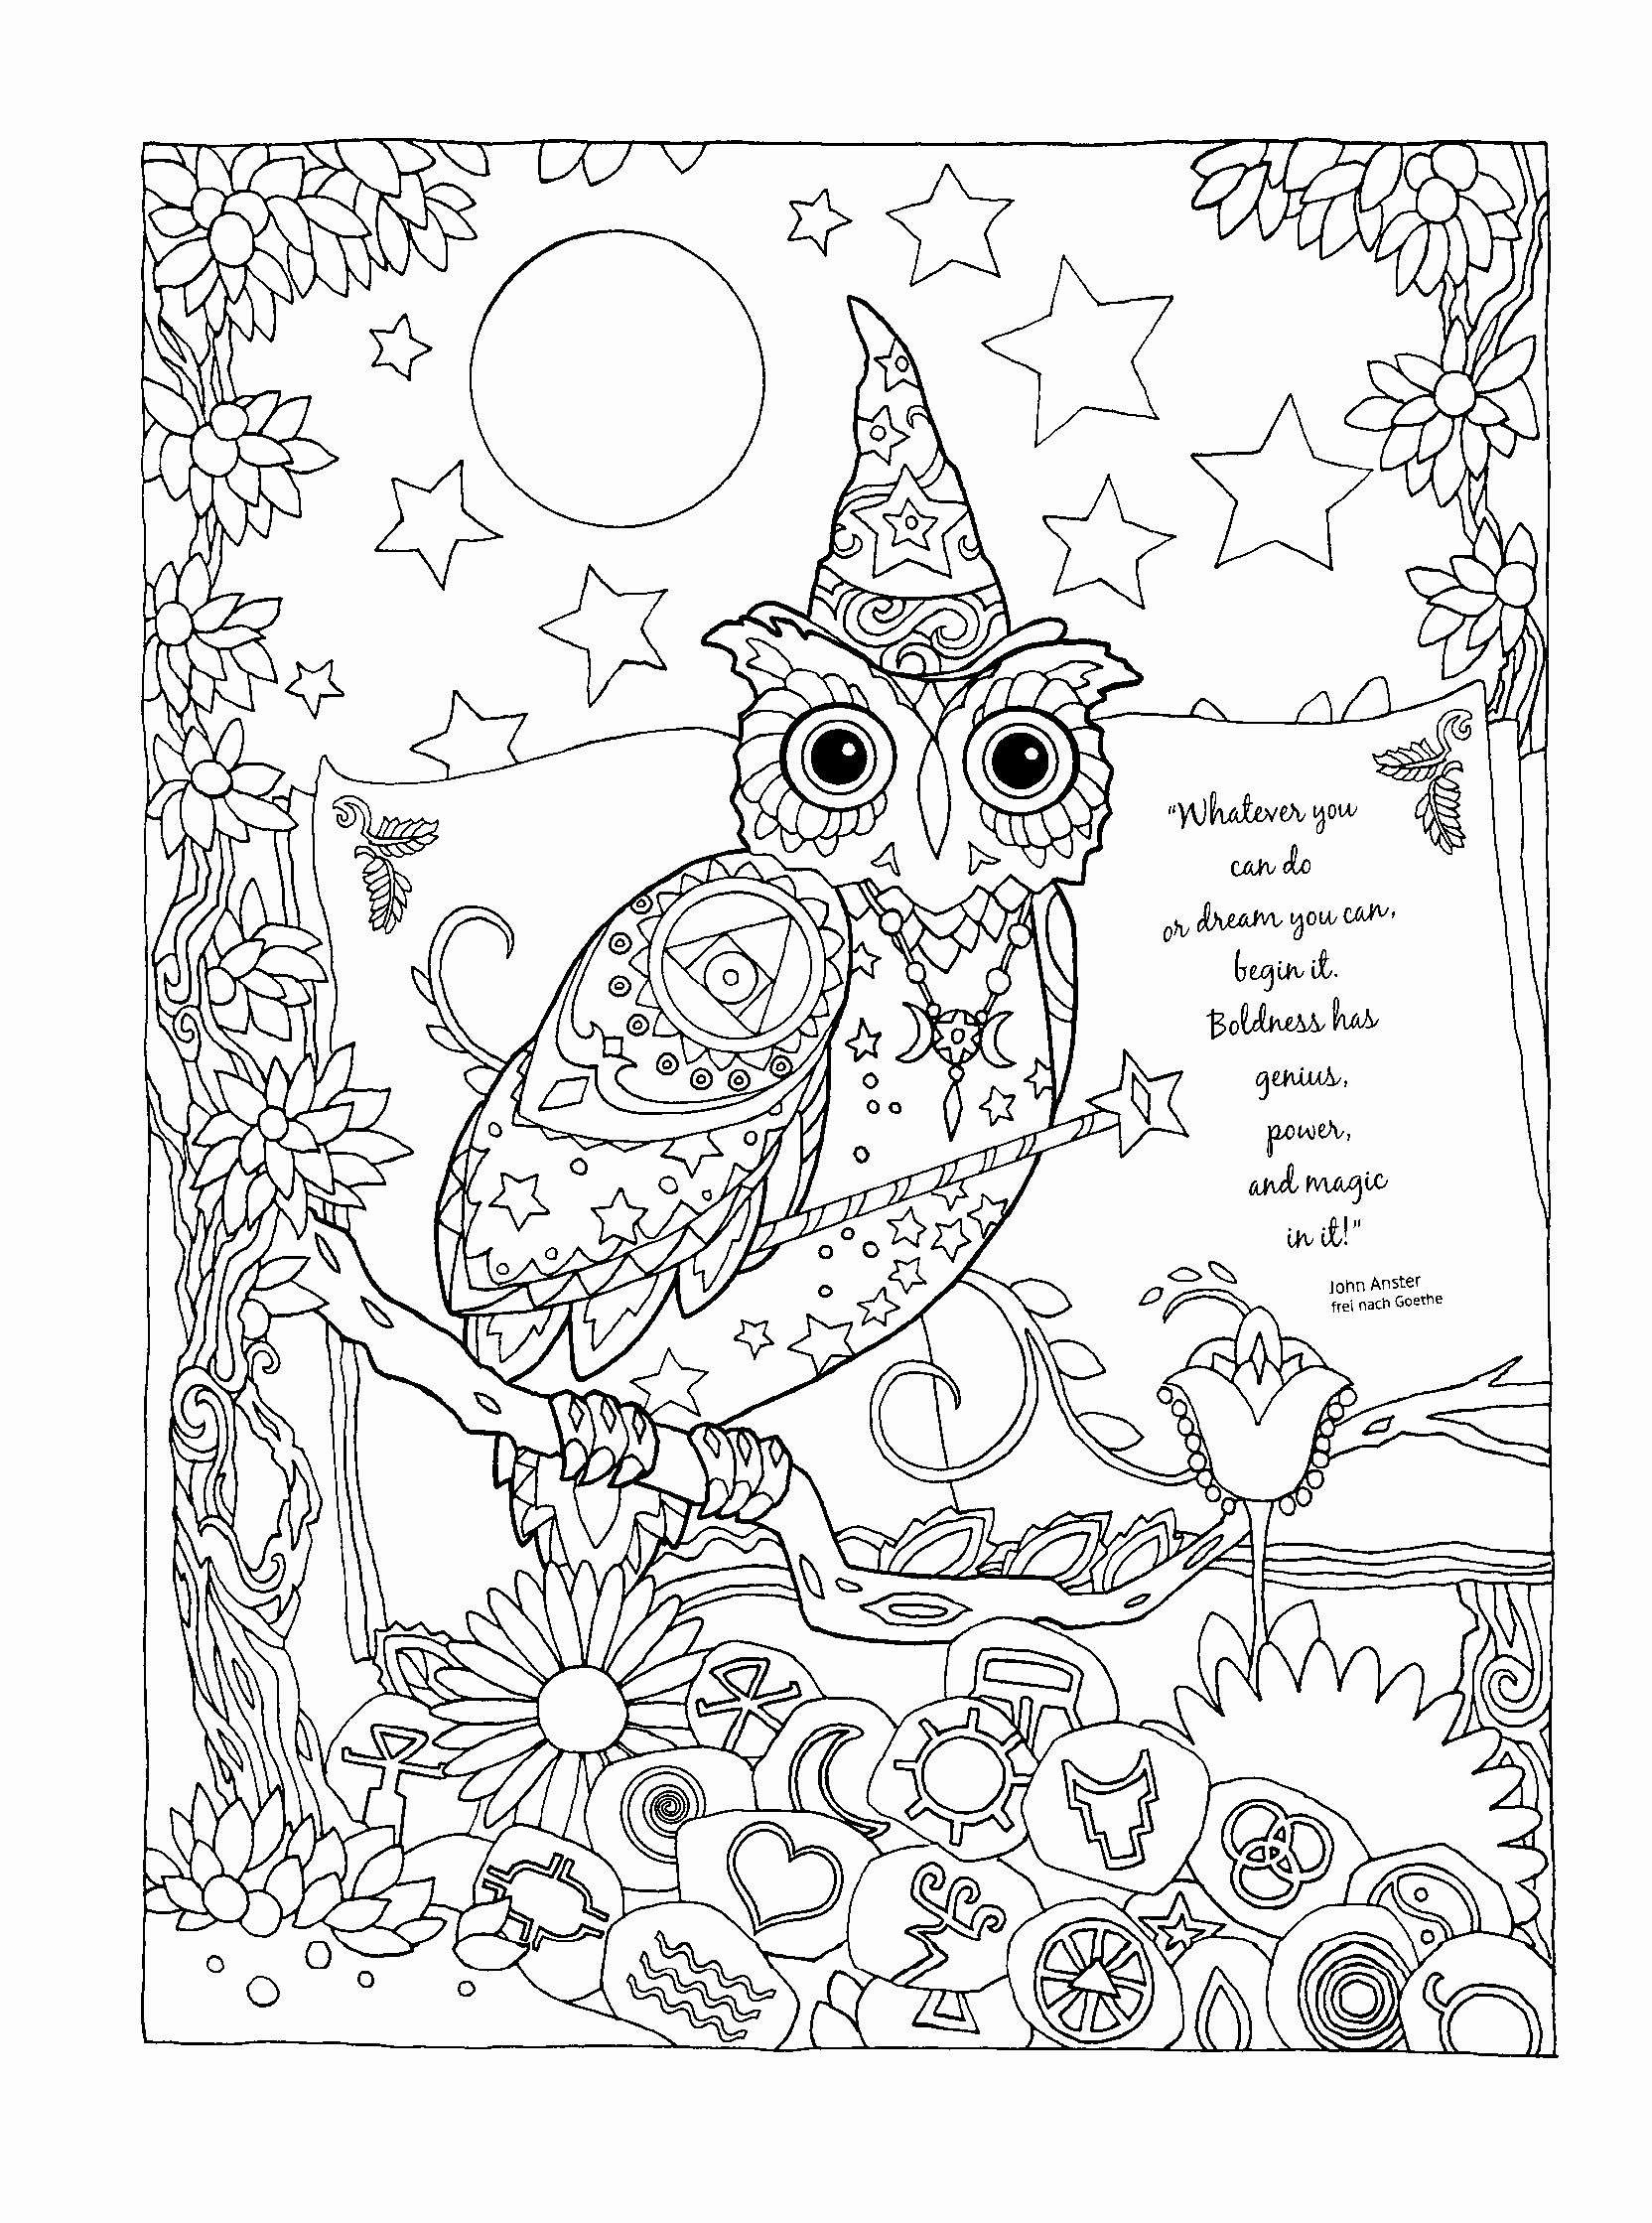 Christmas Dinosaurs Coloring Pages - BubaKids.com